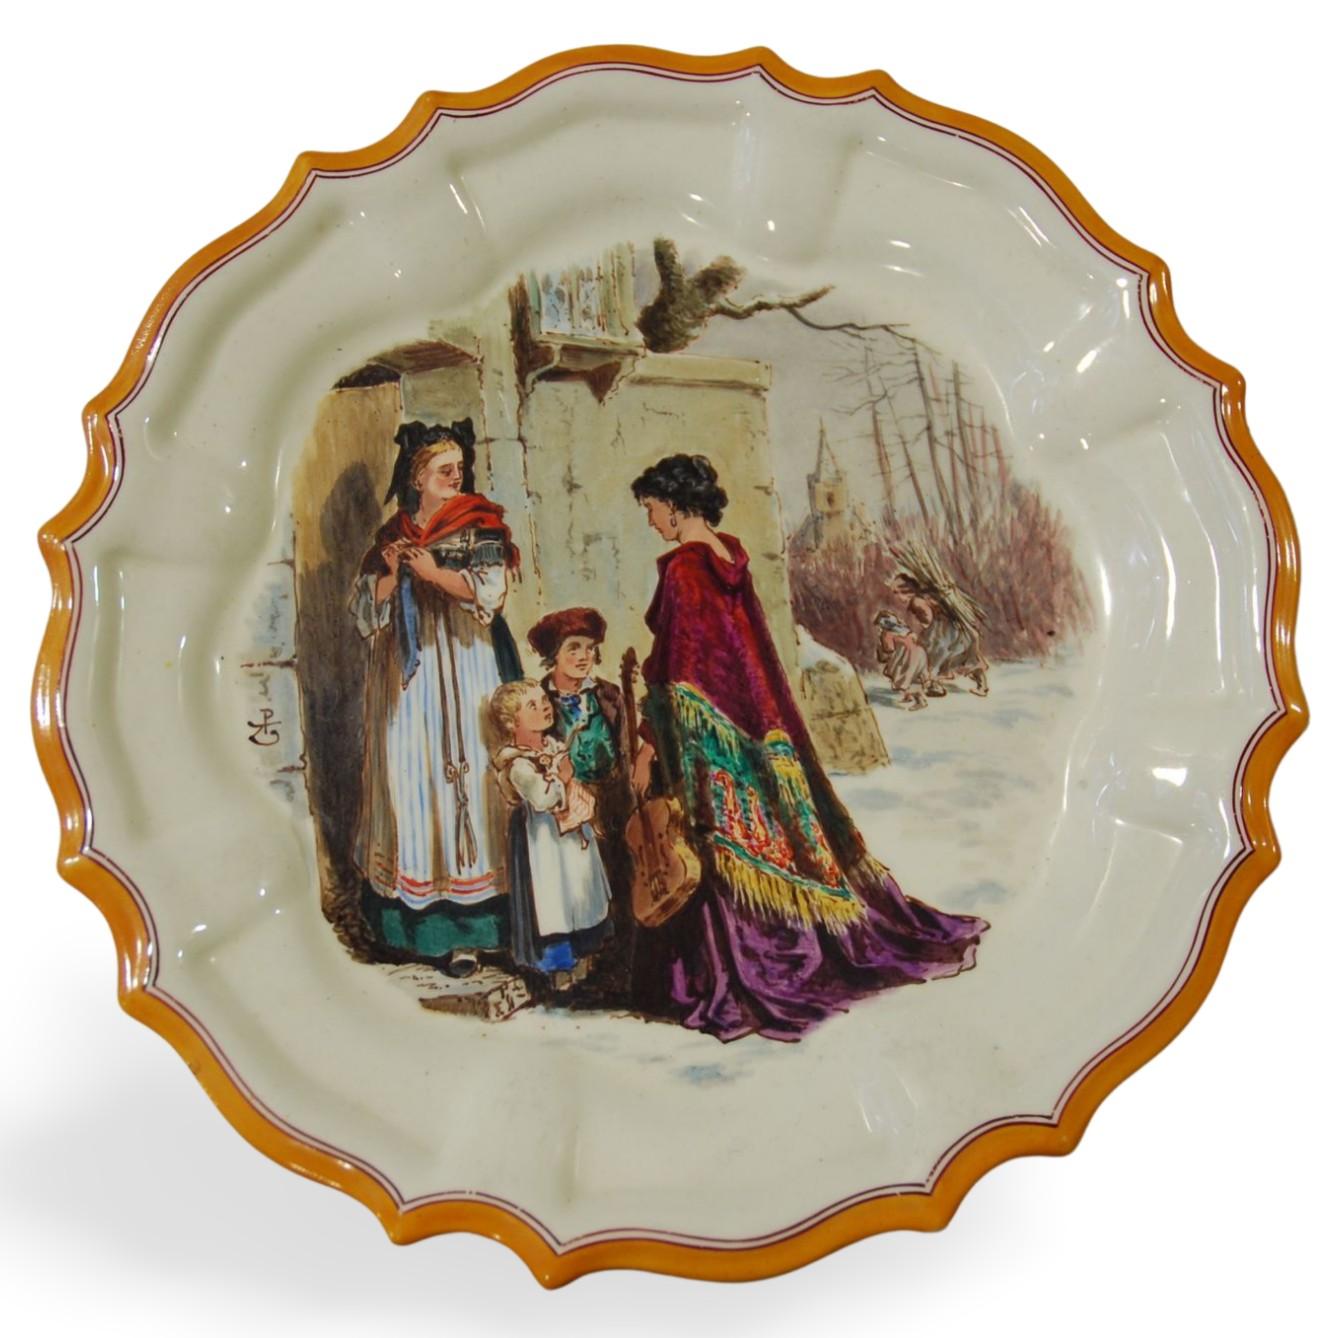 Set of 12 Plates, Aesop Fables, Wedgwood, circa 1860 For Sale 3